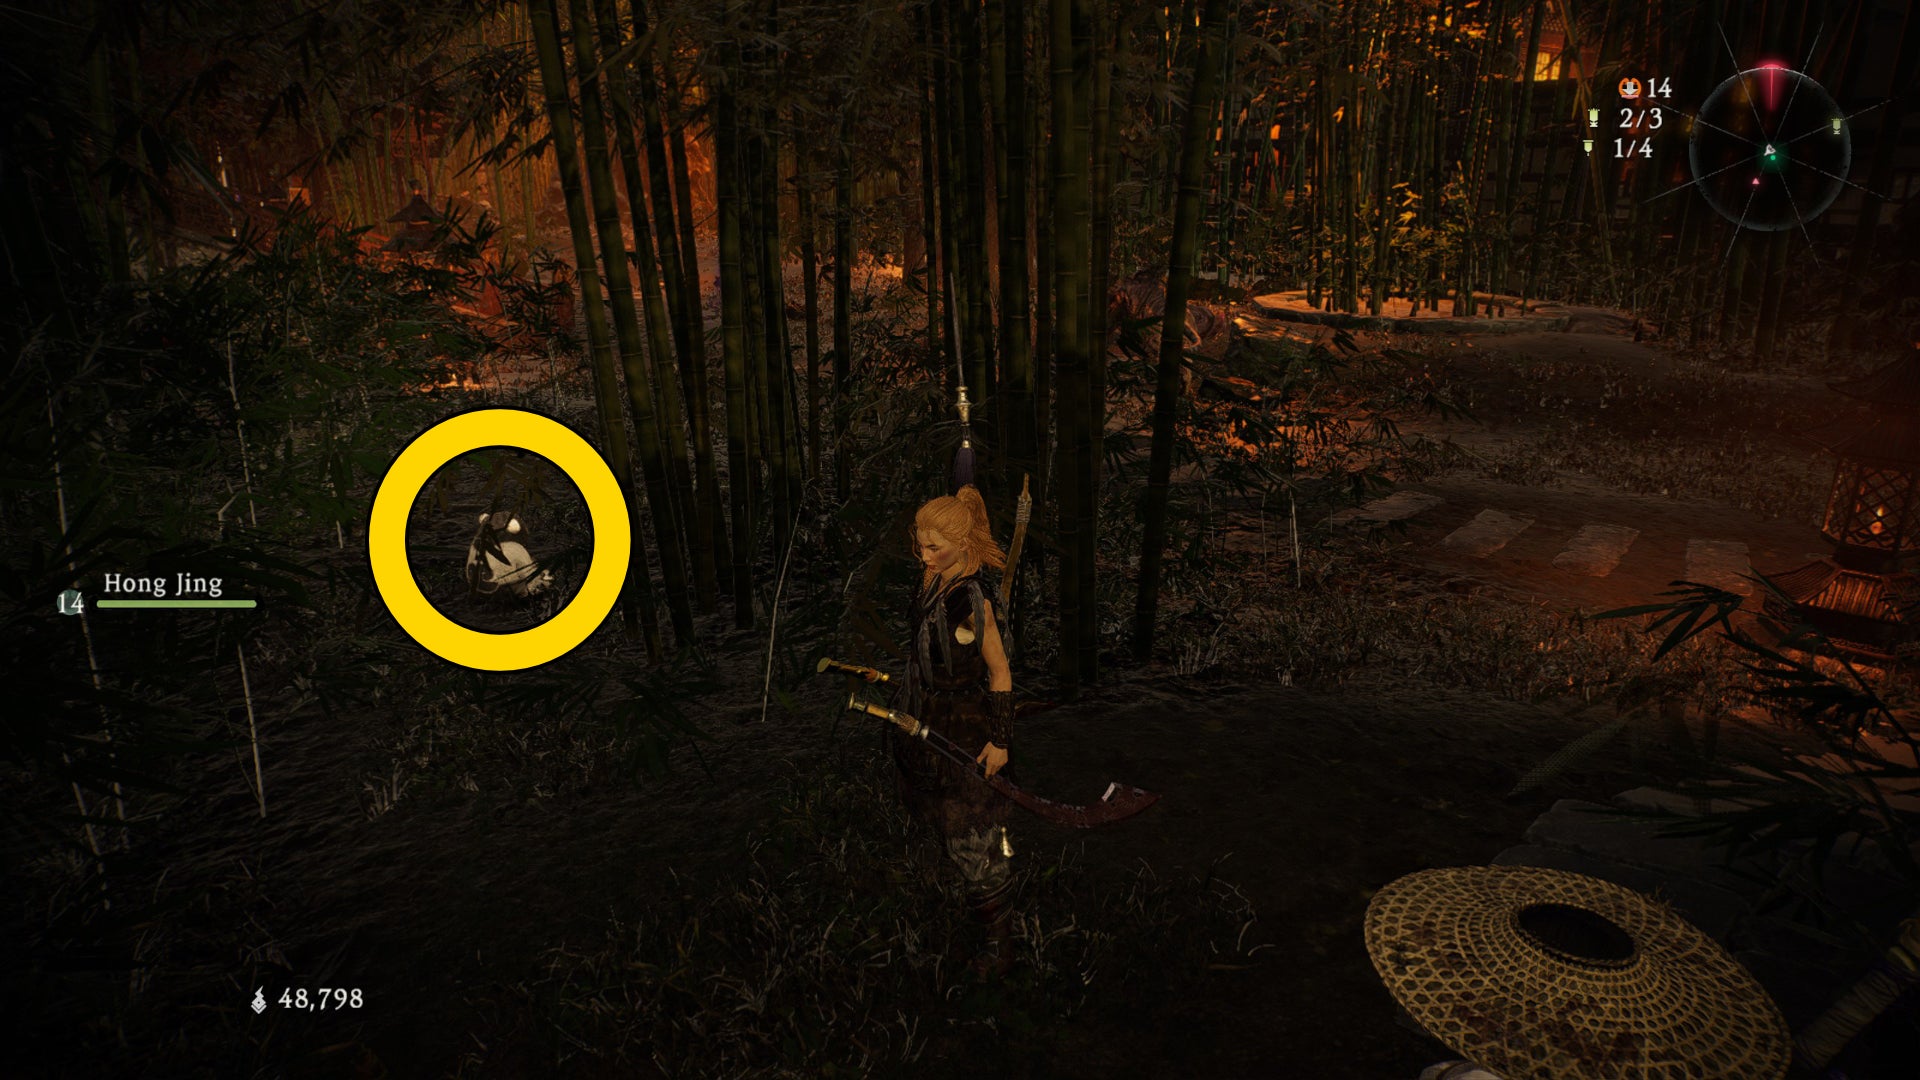 The player in Wo Long stands next to a Shitieshou in a bamboo forest.